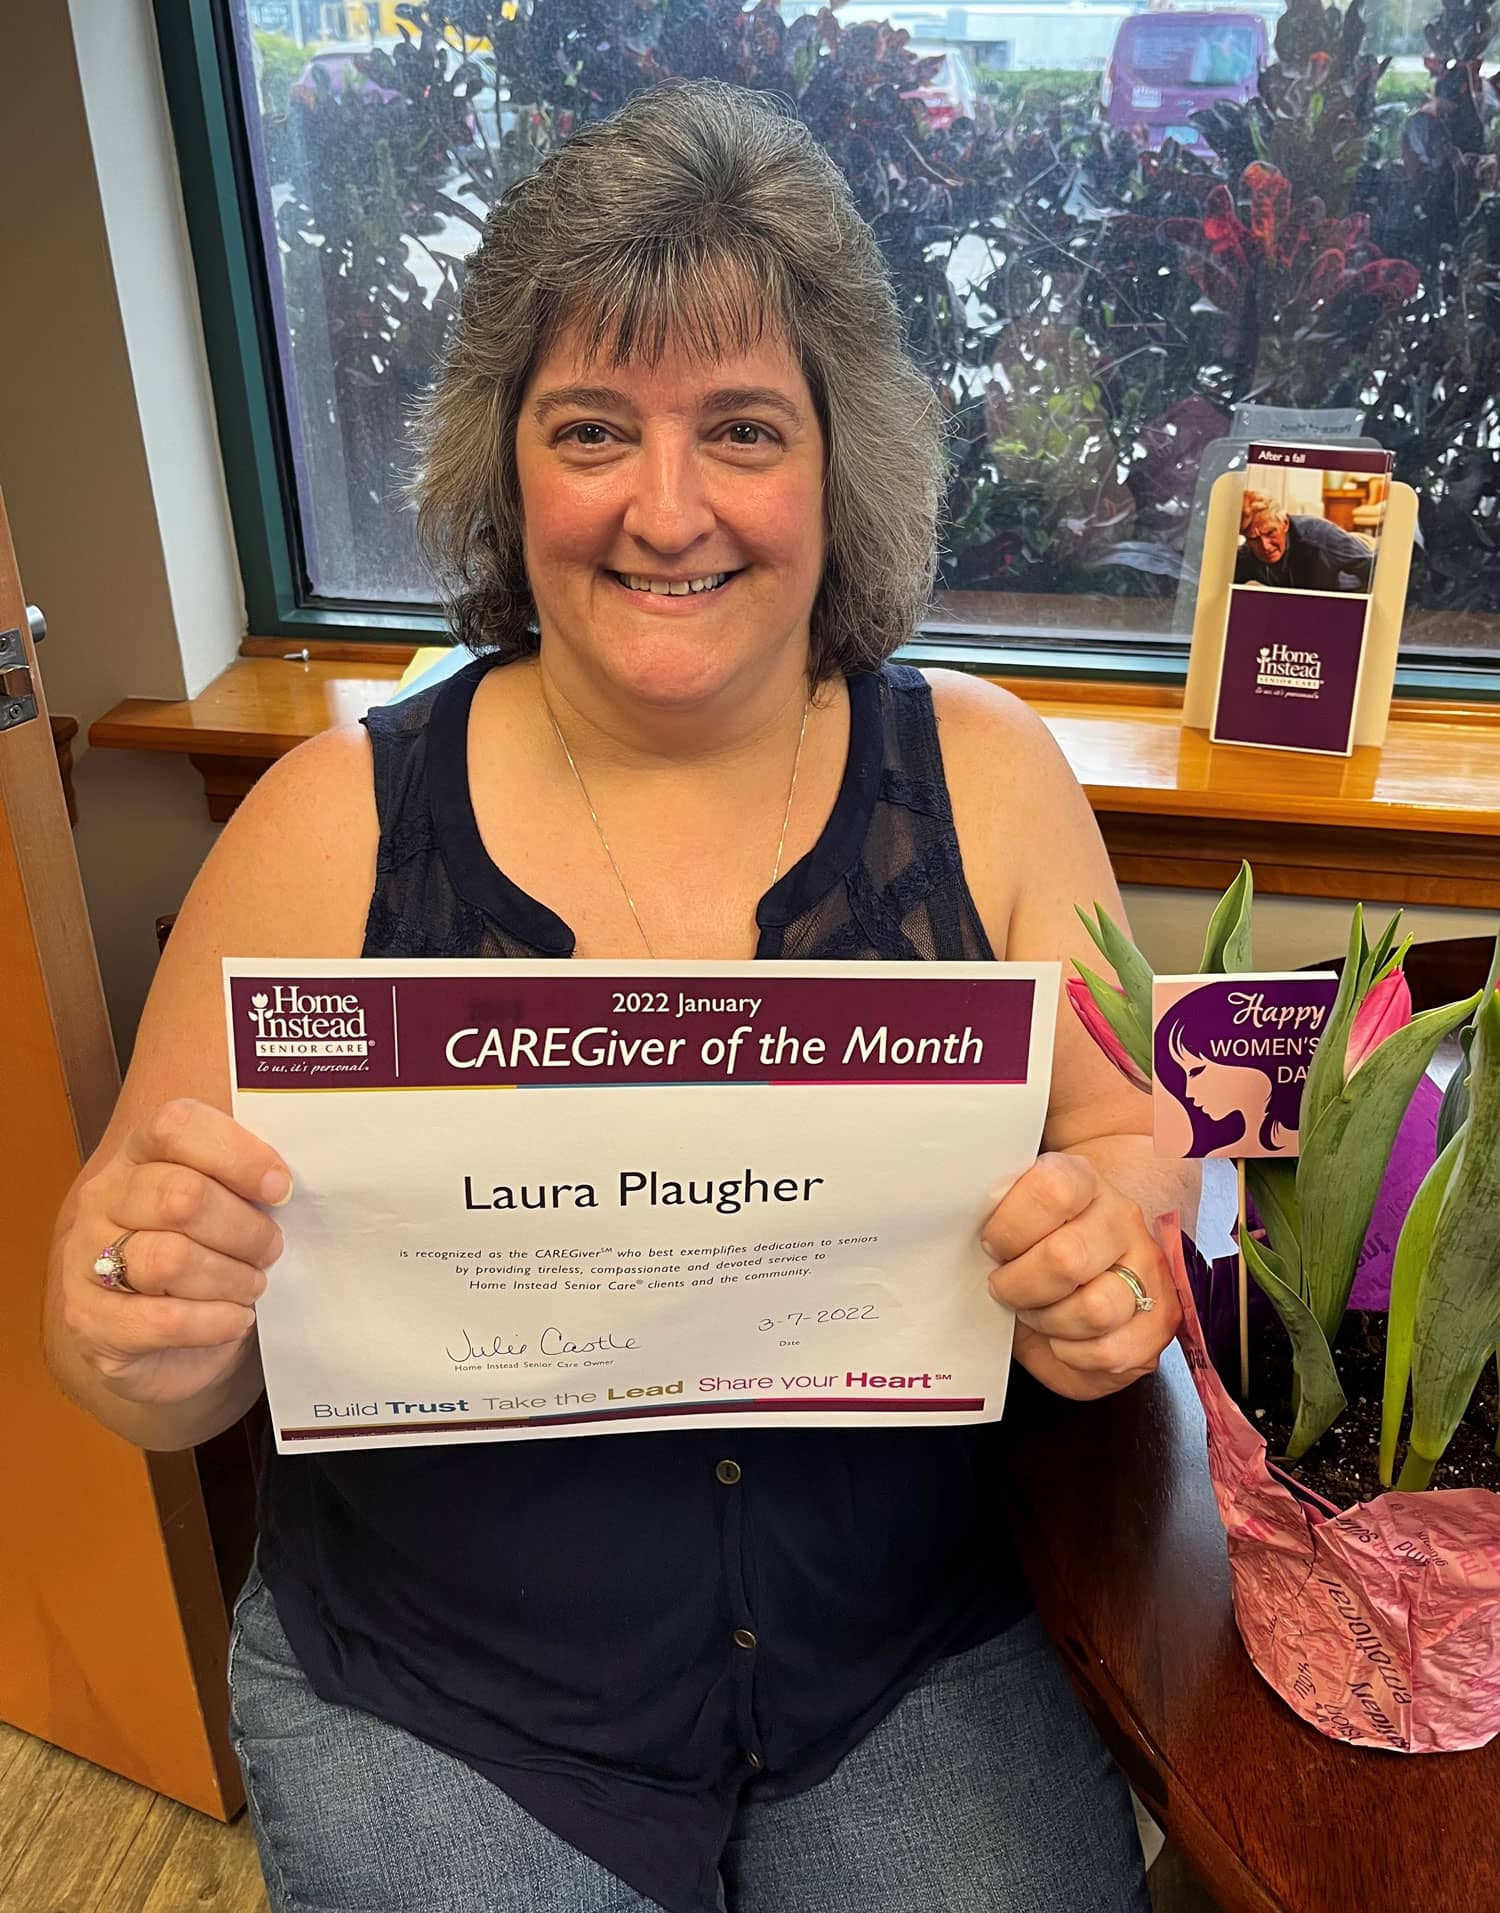 Laura Plaughter, January 2022 CAREGiver of the Month for Home Instead of Clearwater, Florida